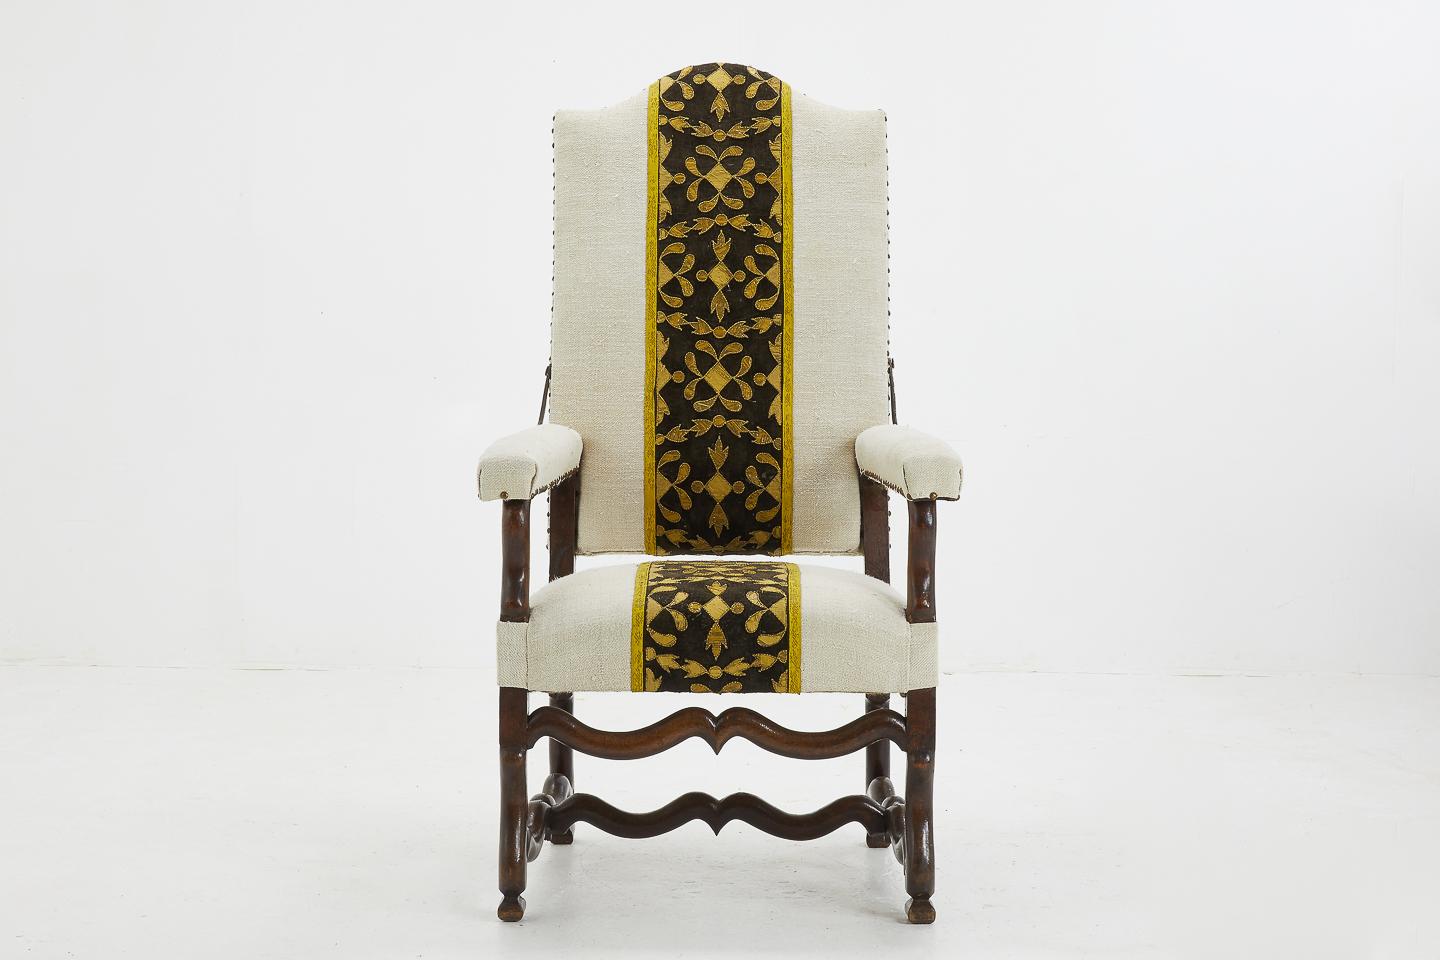 French 18th century walnut reclining armchair upholstered in antique fabric with an 18th century velvet panel with metal thread silk couching.